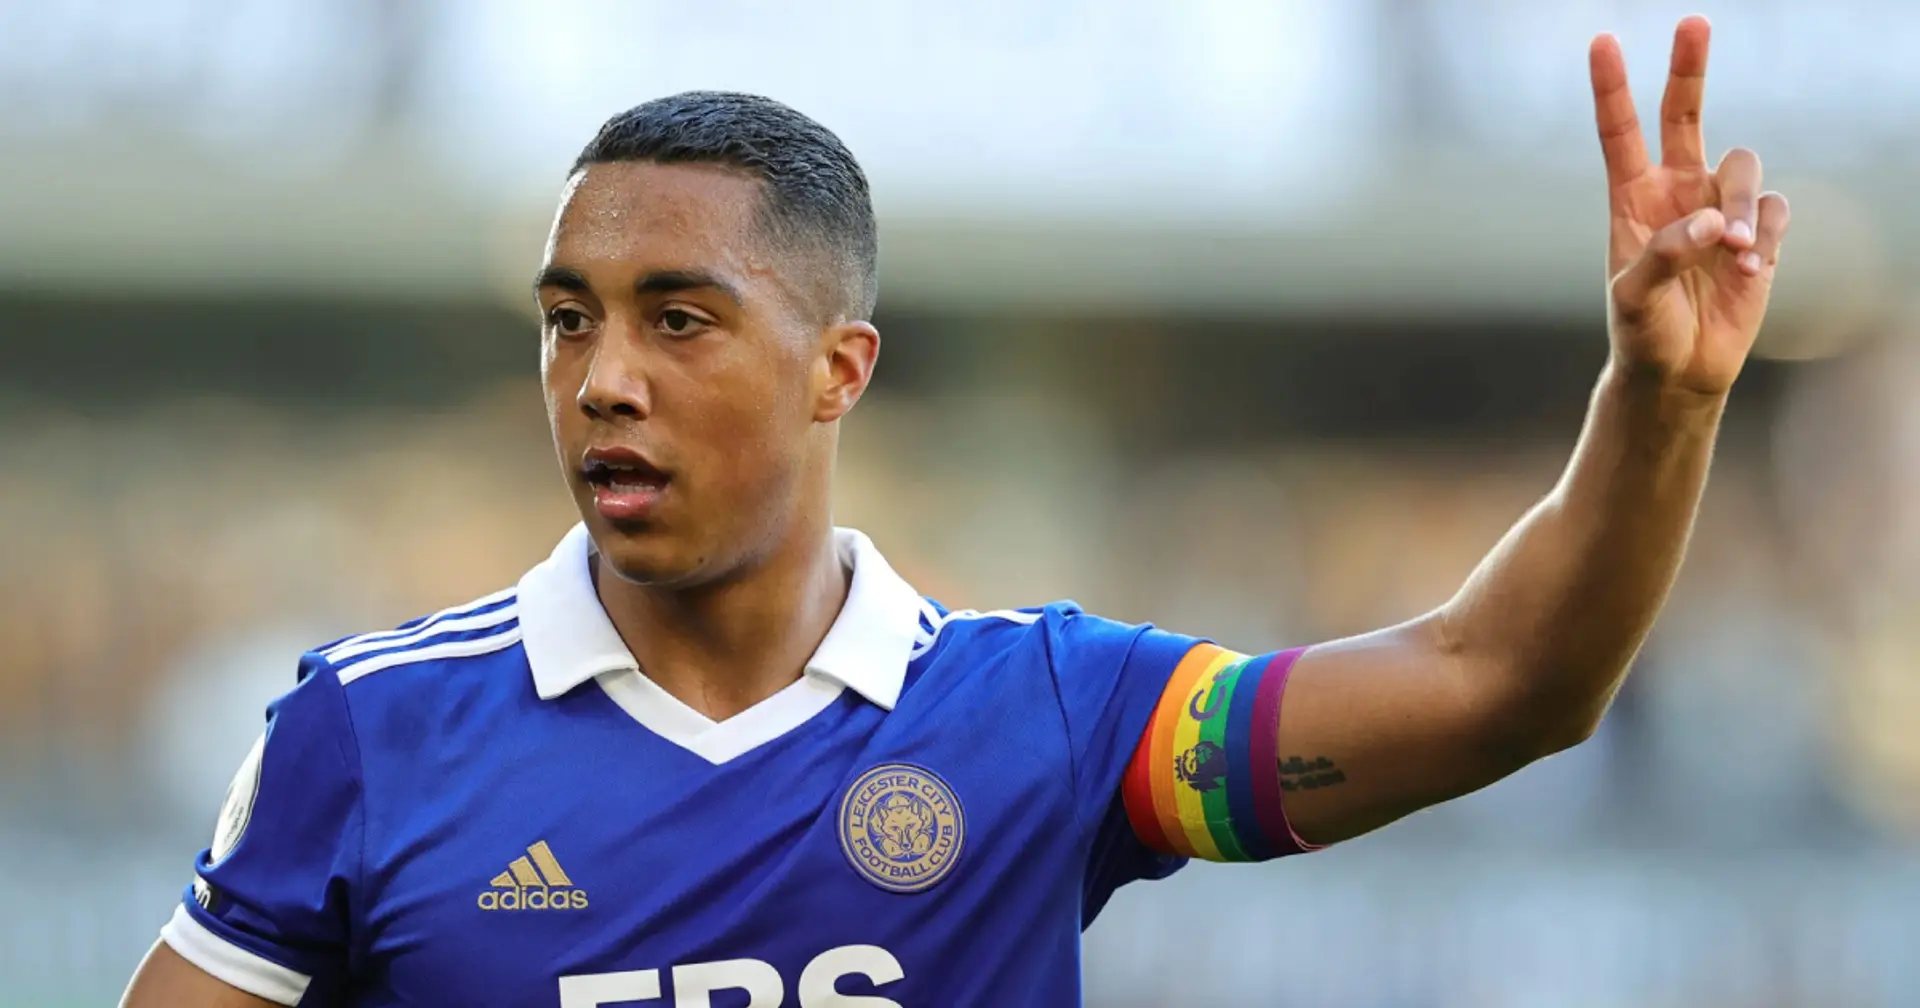 Arsenal 'well placed' to sign Youri Tielemans on a free transfer (reliability: 3 stars)